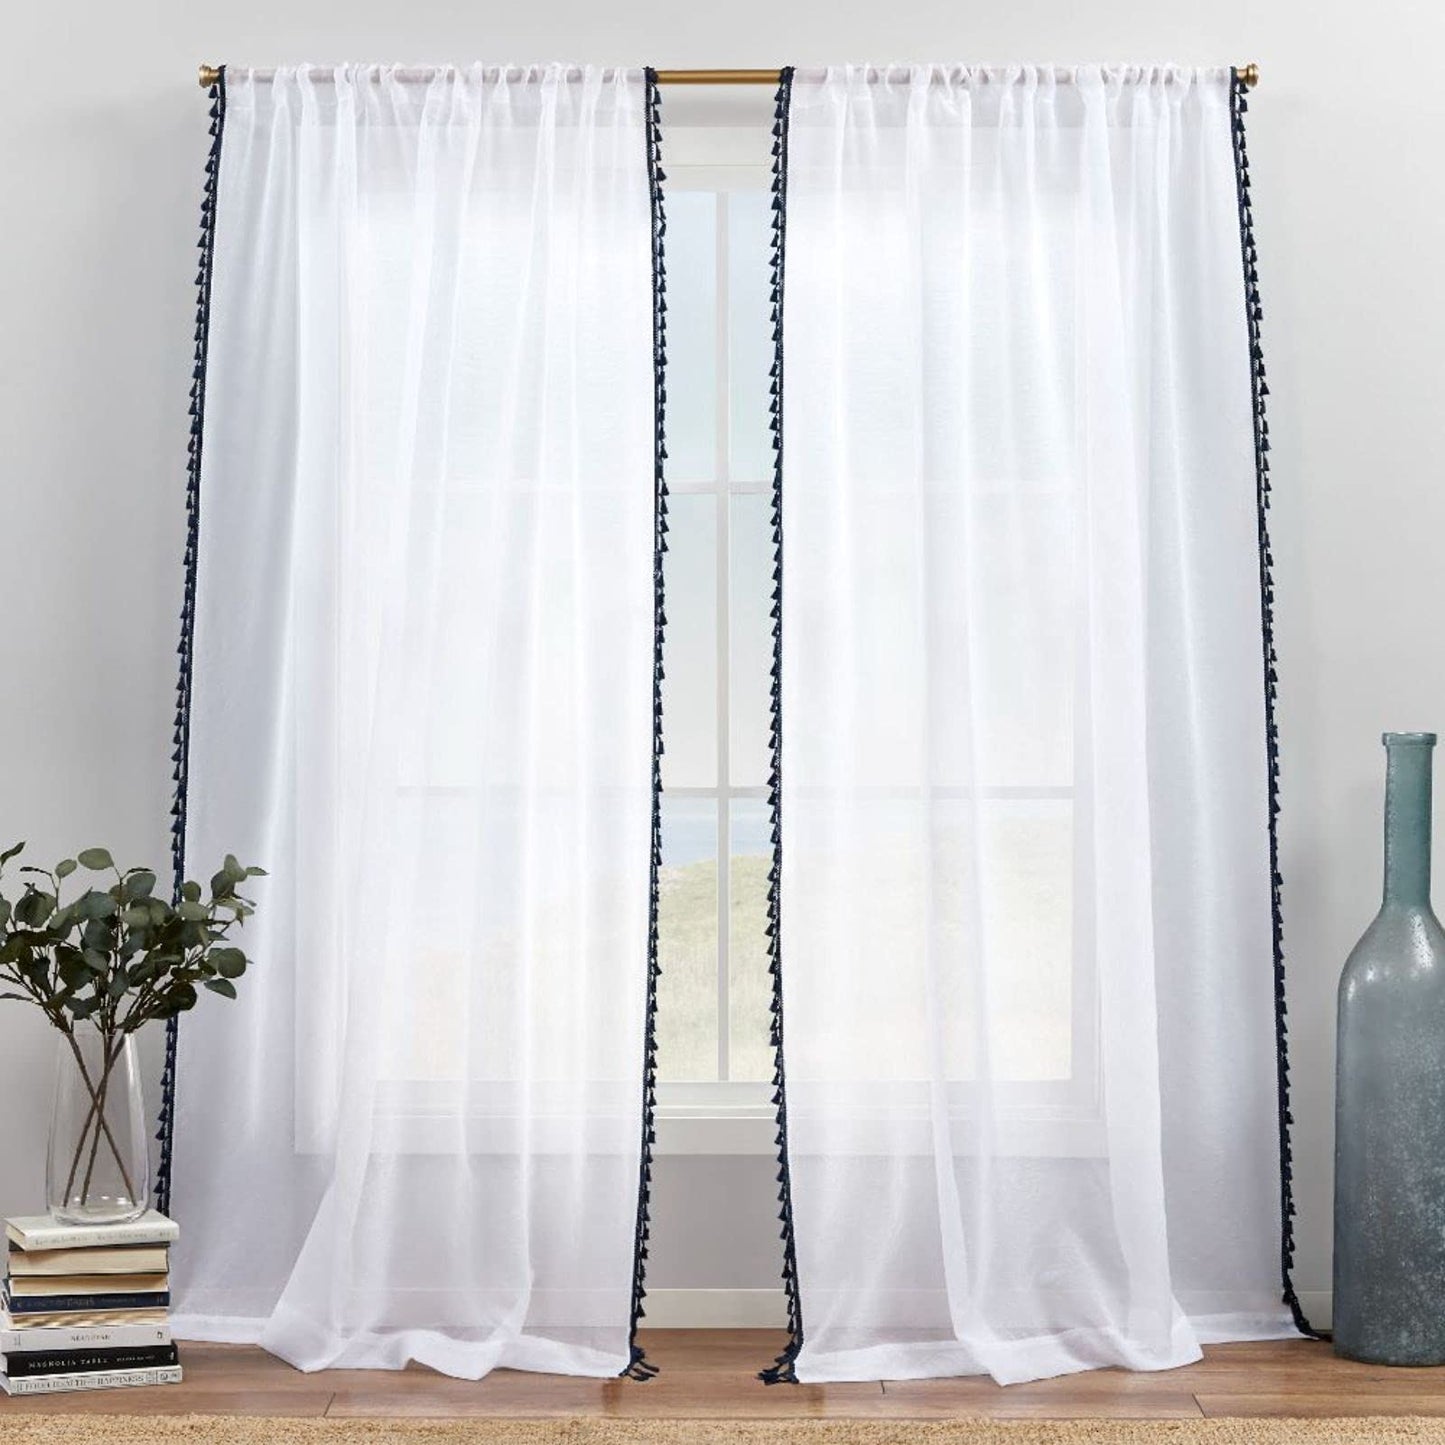 Exclusive Home Tassels Embellished Sheer Rod Pocket Curtain Panel Pair, 54"x96",